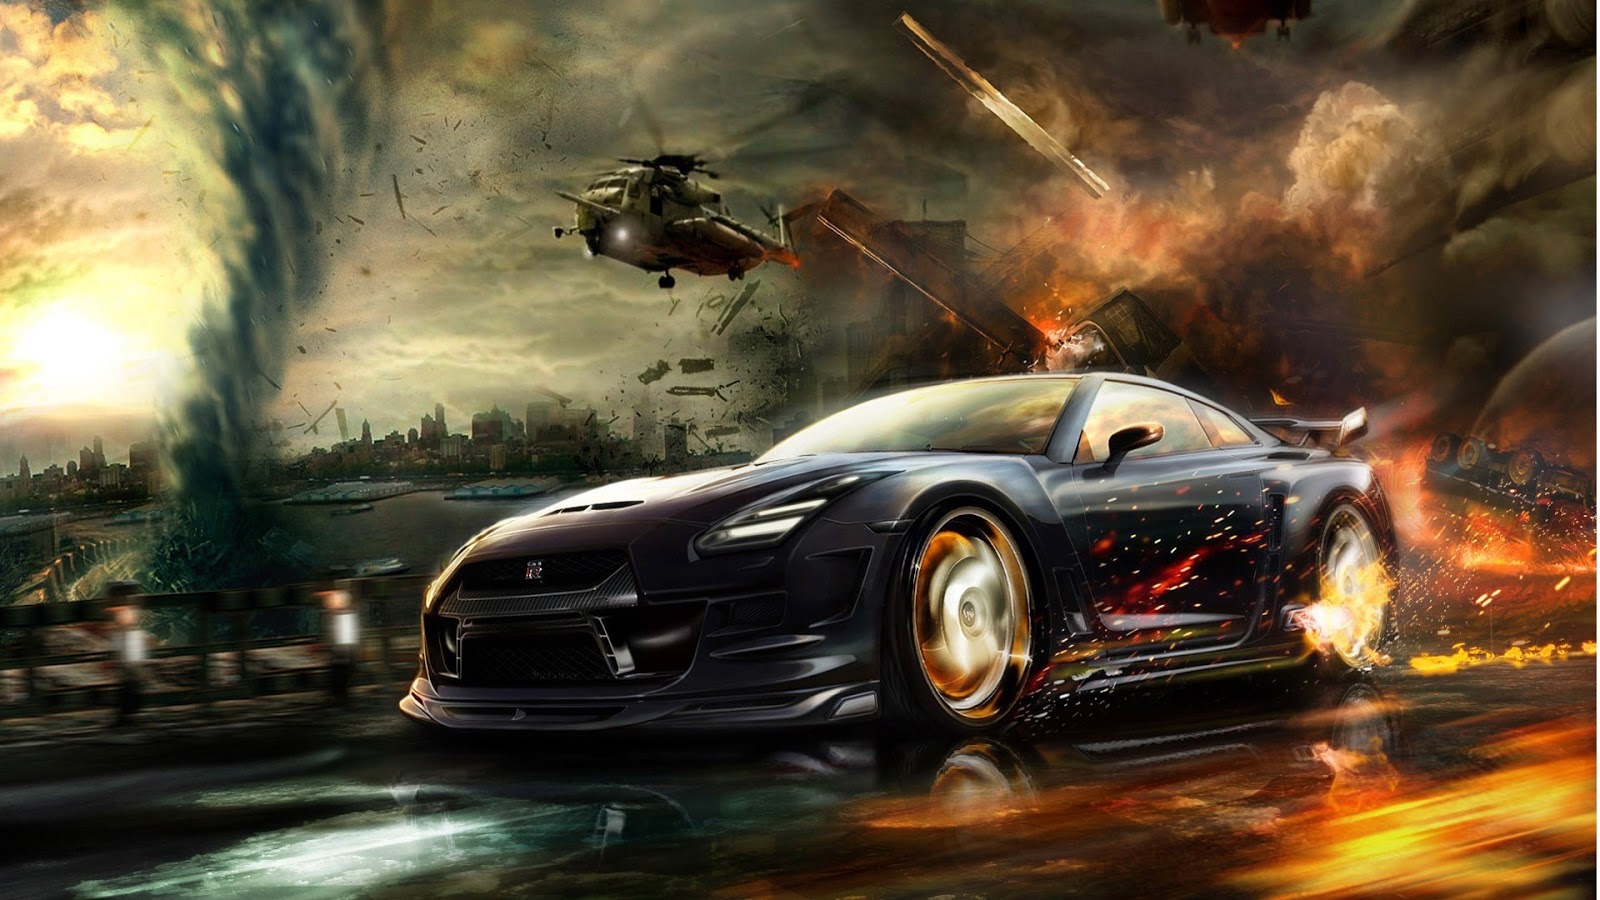 Ultra HD Wallpapers3d images latest ultra pictures cars 1600x900